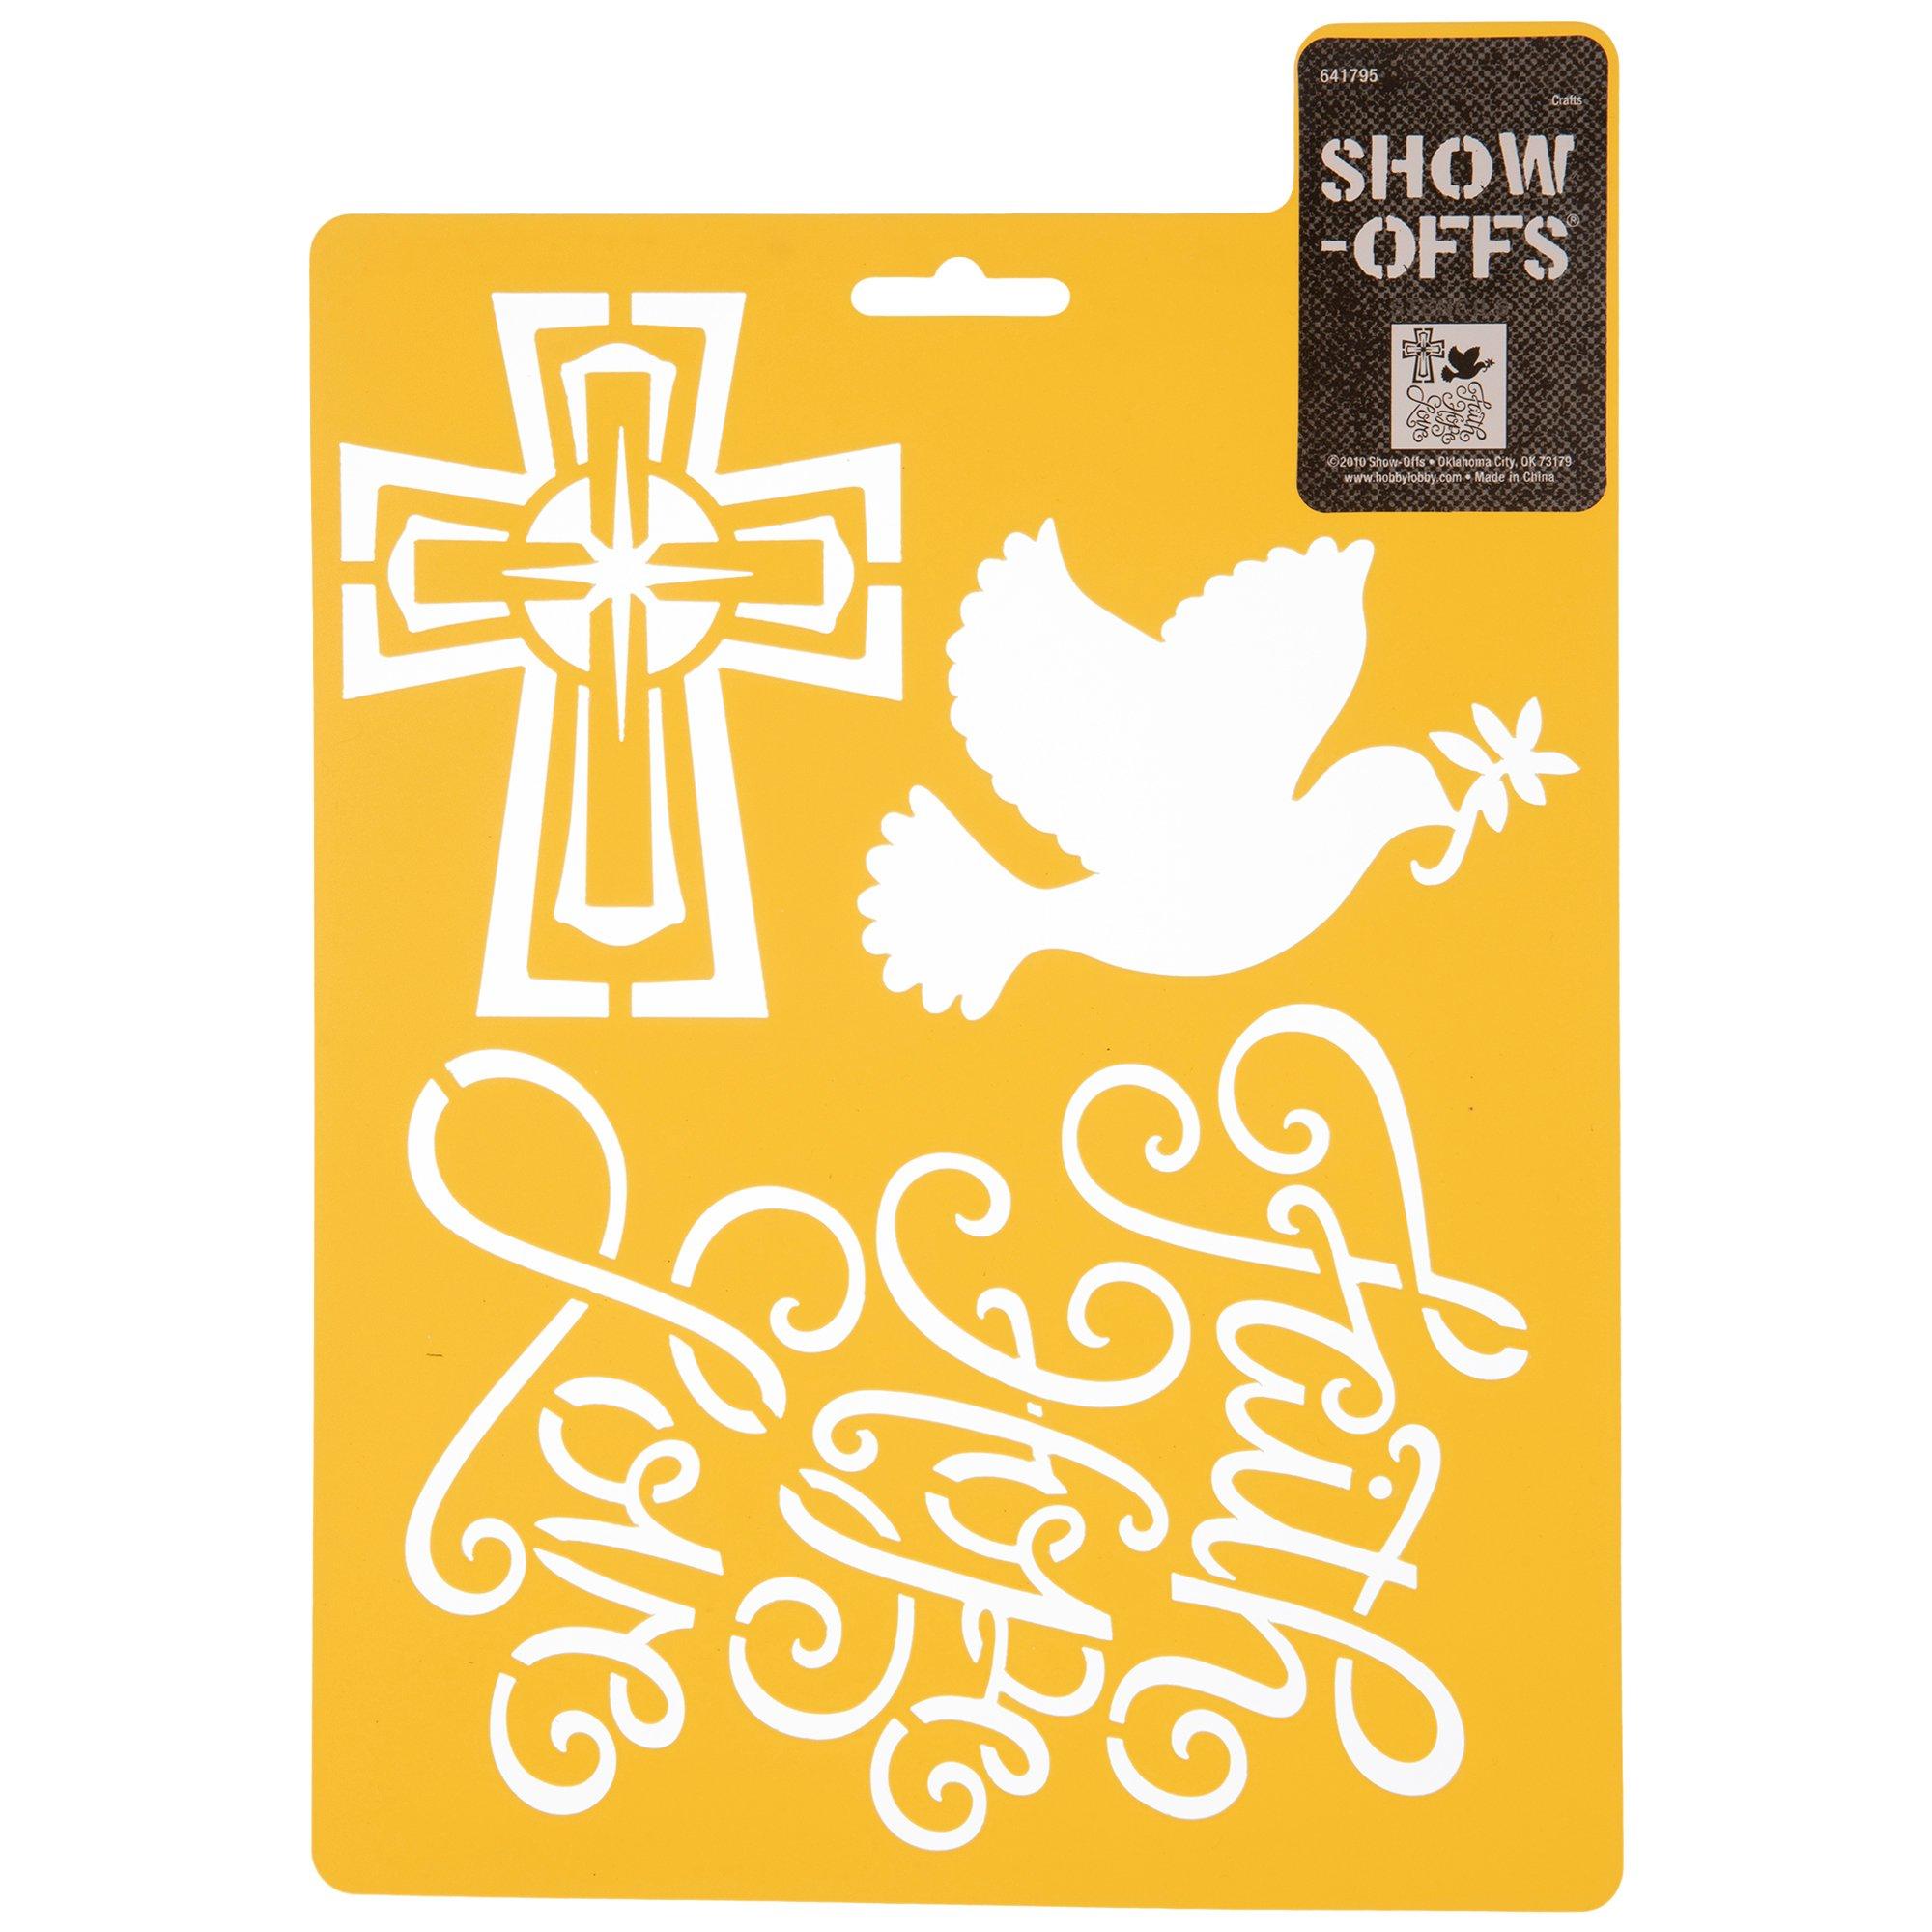 Welcome & Blessed Adhesive Stencil, Hobby Lobby